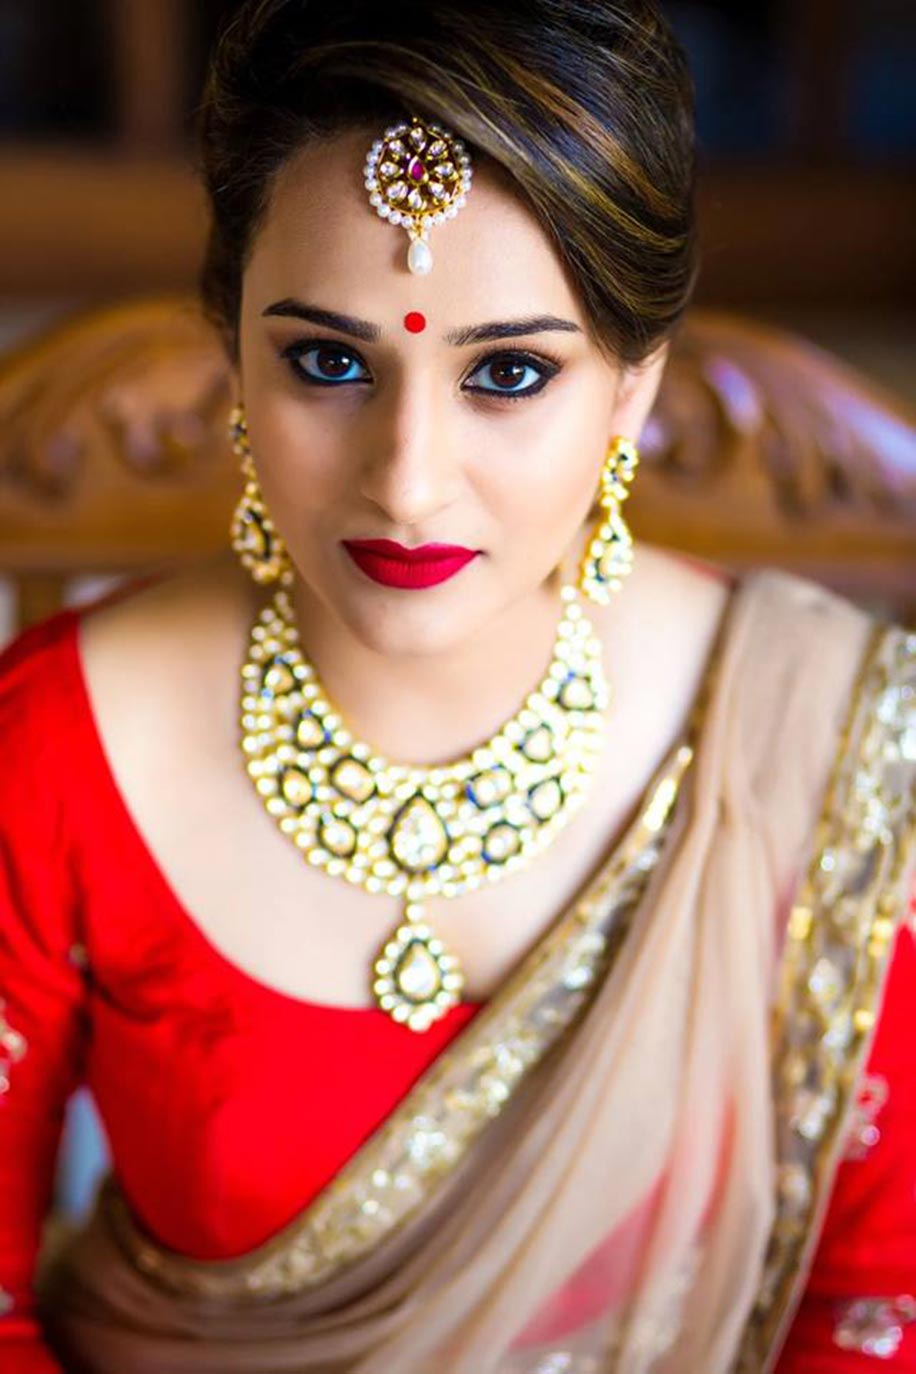 top 10 makeup looks for your wedding reception | bridal beauty